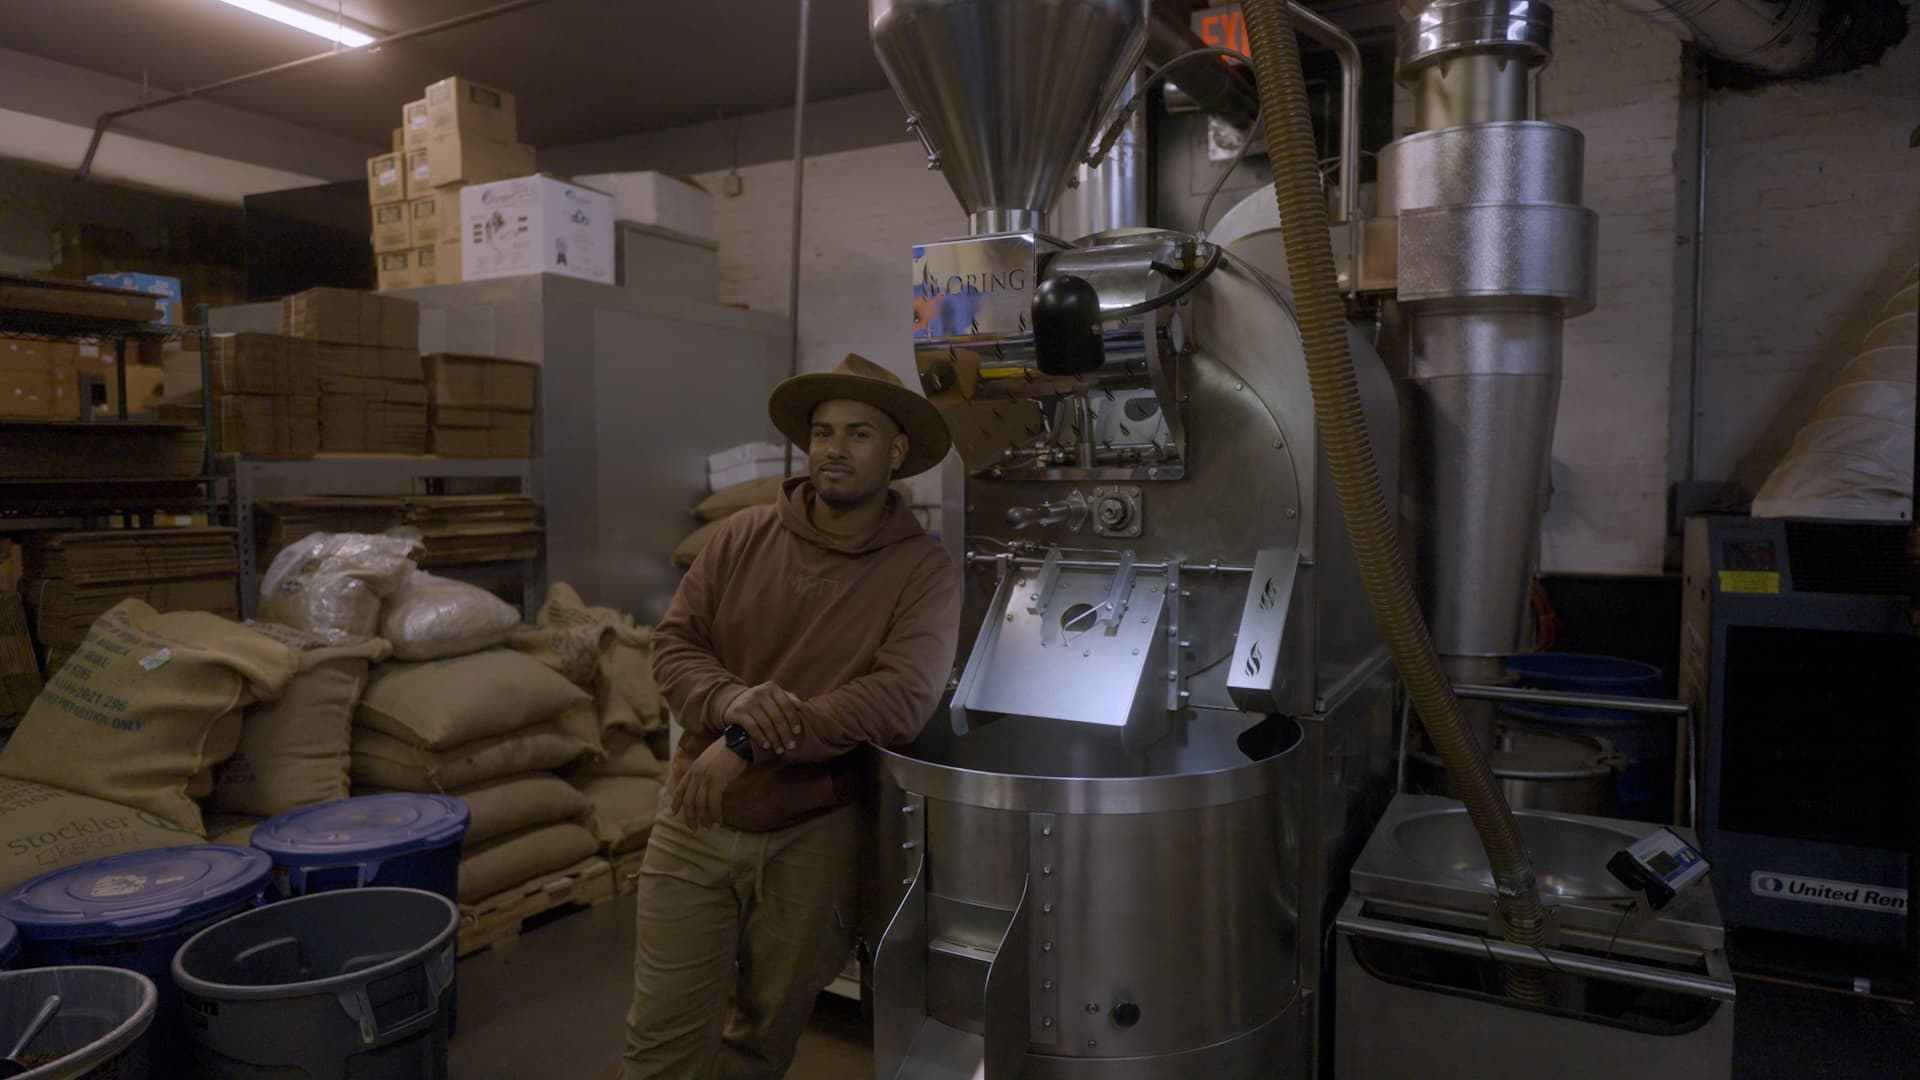 Hector Carvajal, 26, is the founder of Don Carvajal Cafe, a Dominican-sourced coffee roaster, and lives on $25,000 a year just outside New York City.